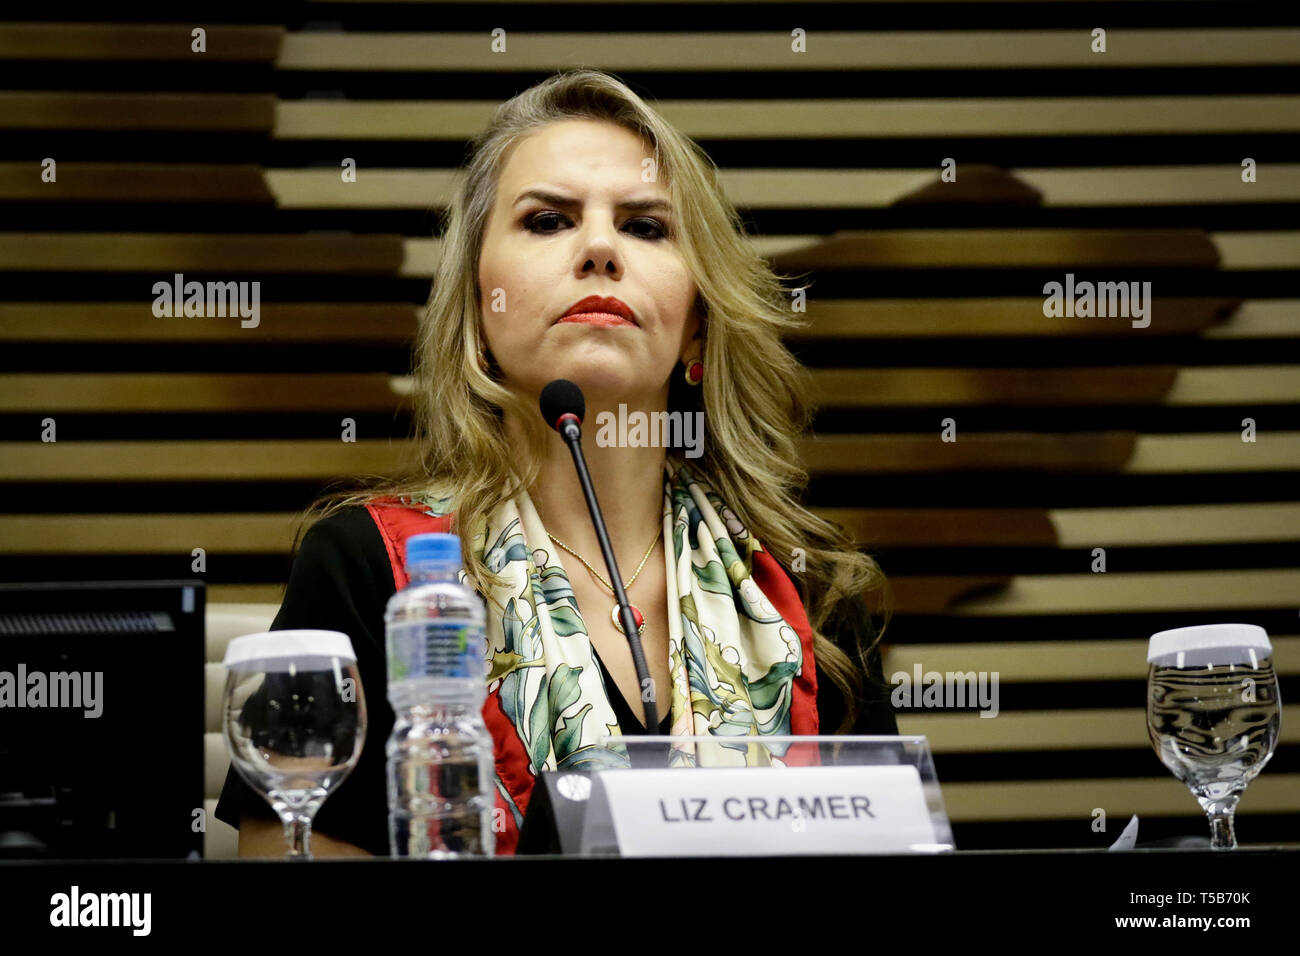 SÃO PAULO, SP - 23.04.2019: ENCONTRO EMPRESARIAL BRASIL PARAGUAI - In the photo, the Minister of Industry and Commerce of Paraguay, Liz Cramer. The Federation of Industries of the State of São Paulo (Fiesp) will receive on Tuesday (23), the Minister of Industry and Commerce of Paraguay, Liz Cramer at the Brazil-Paraguay Business Meeting. The President of the Central Bank of Paraguay, José Cantero, and the President of the Paraguay-Brazil Chamber of Commerce, Rubens Jacks, will also participate in the event, which will discuss the macroeconomic situation of Paraguay, as well as business and inv Stock Photo